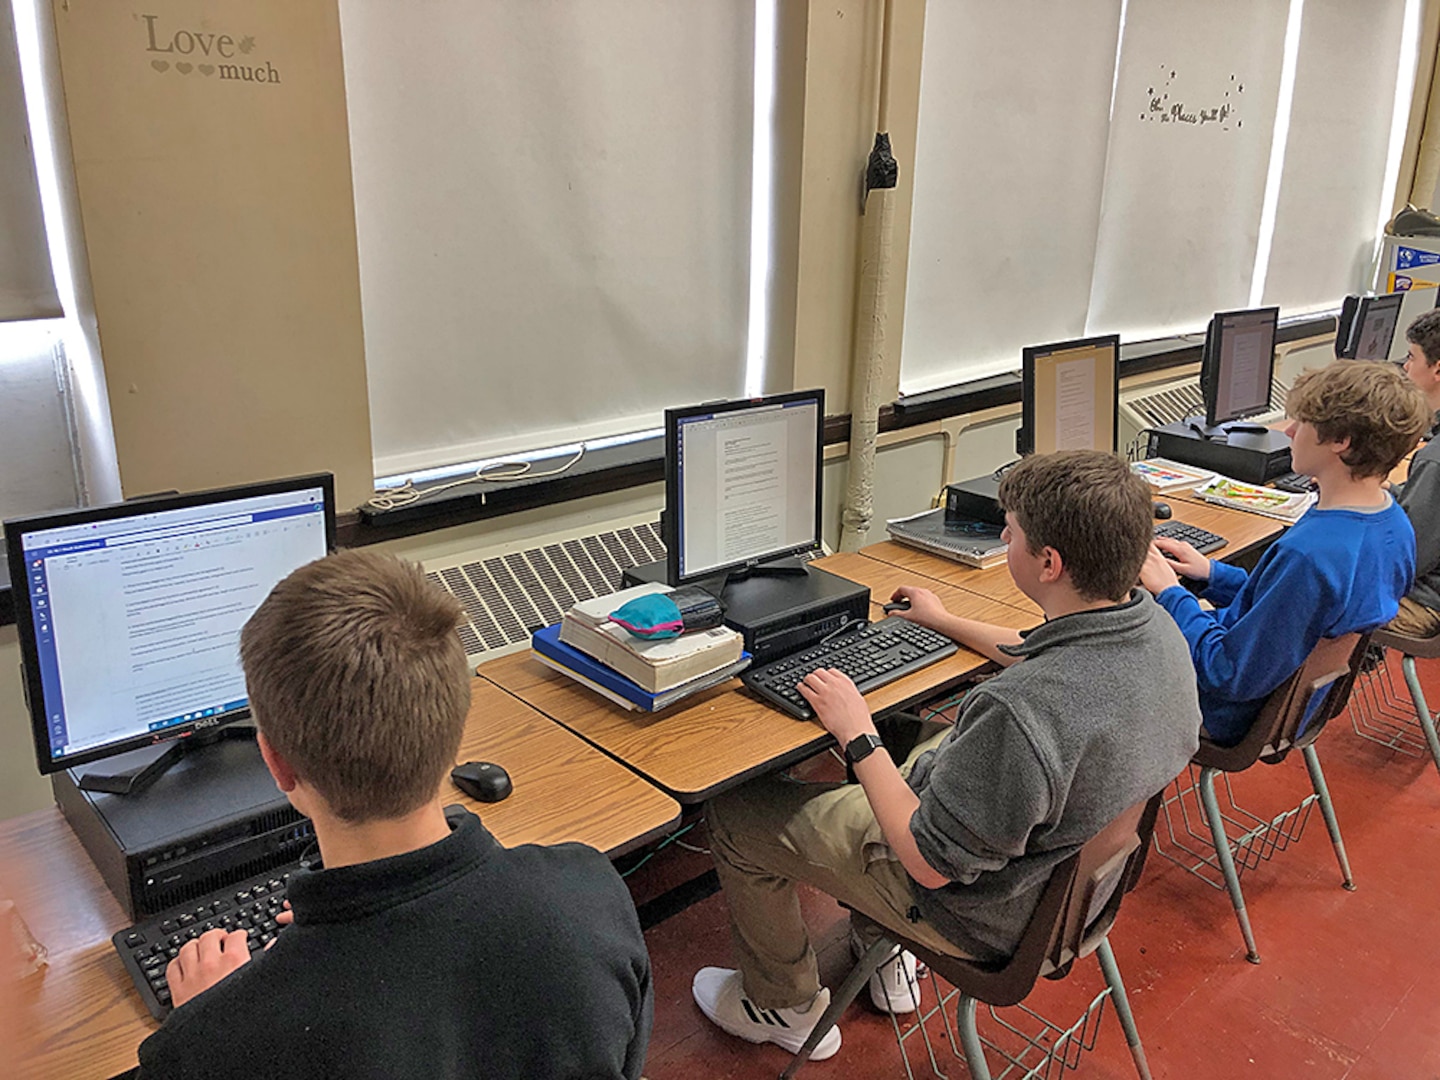 Students work on computers.